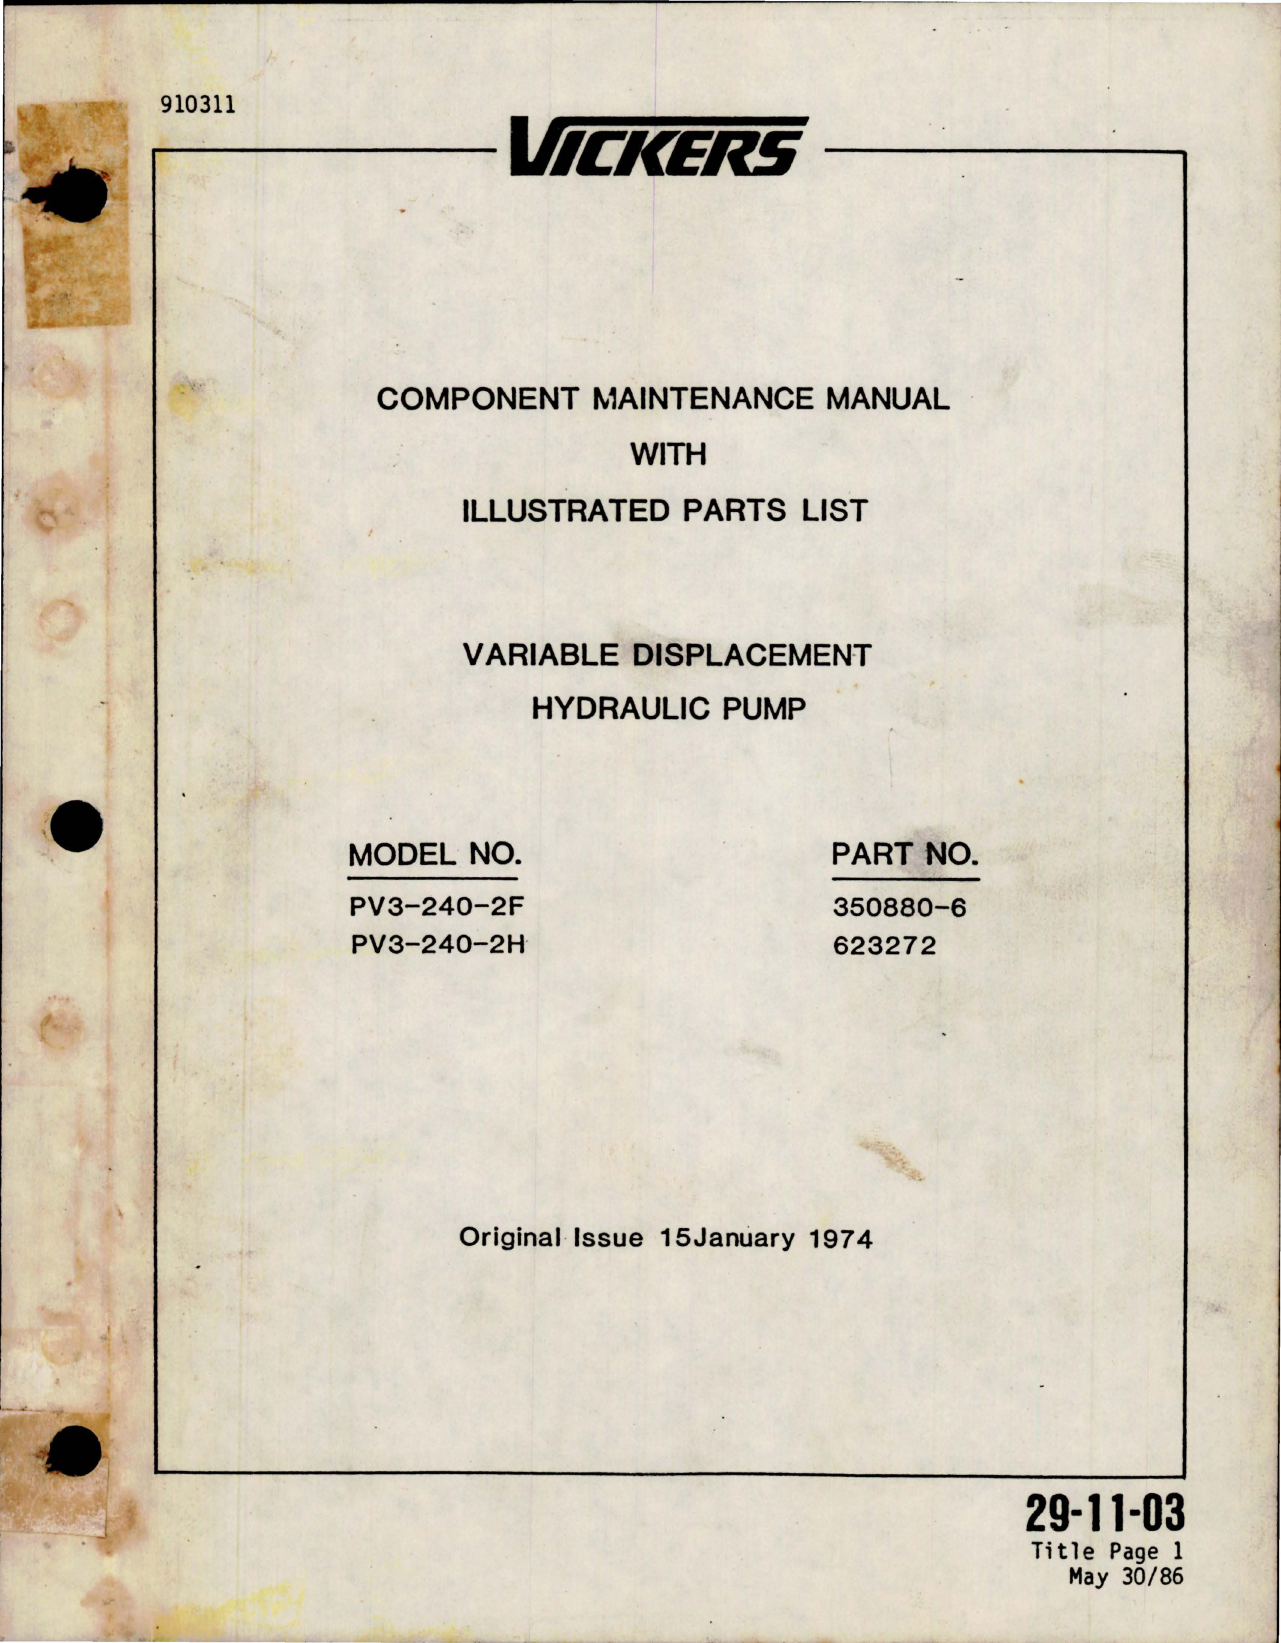 Sample page 1 from AirCorps Library document: Maintenance Manual with Parts List for Variable Displacement Hydraulic Pump - Parts 350880-6 and 623272